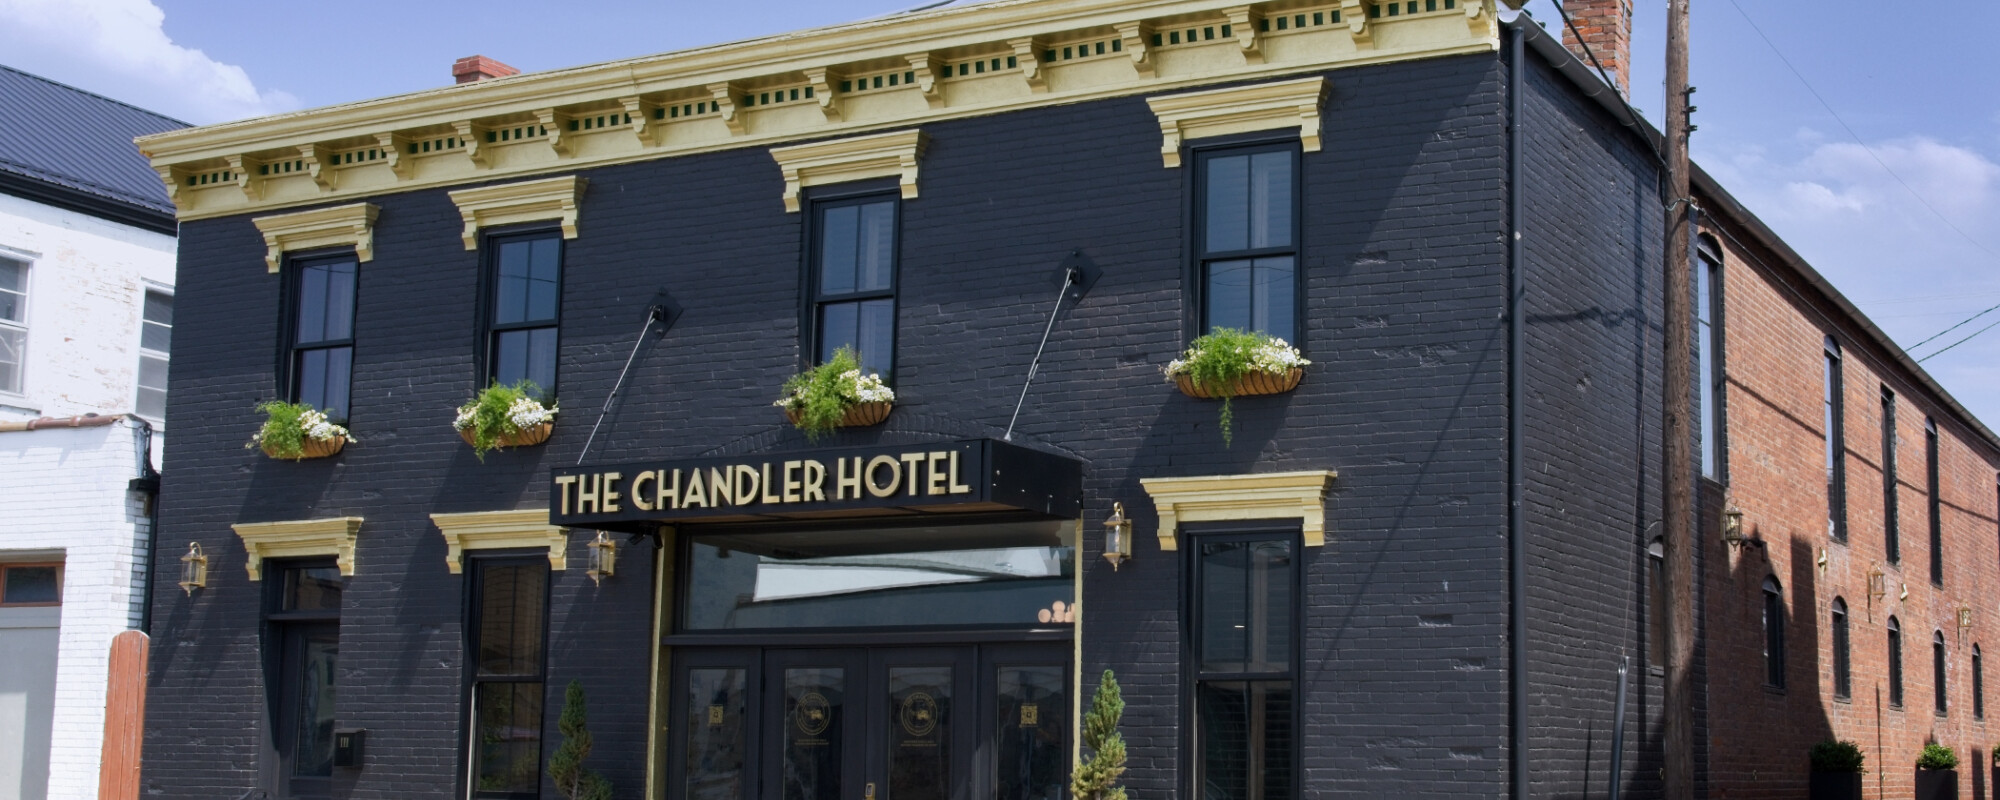 Exterior of a renovated historic building painted black with gold trim and an awning reading "The Chandler Hotel."